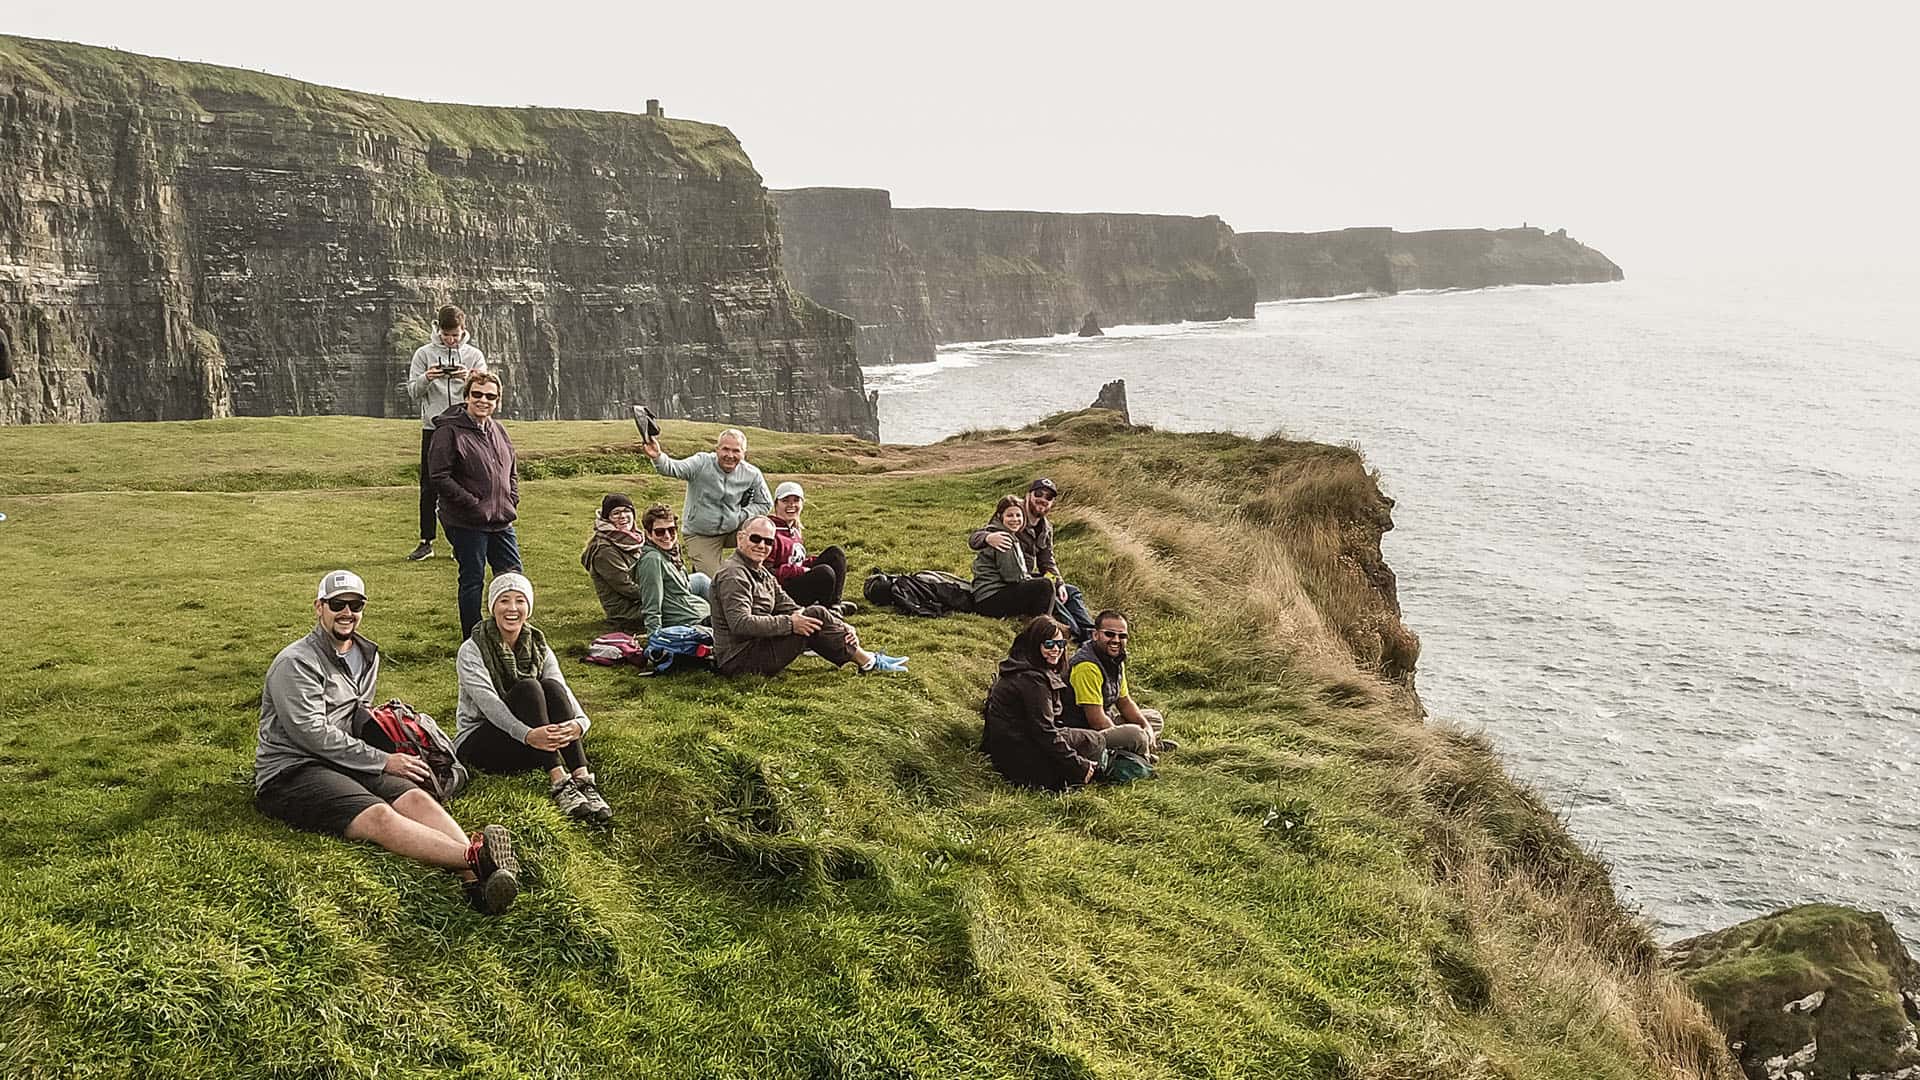 Group of people sitting on grass overlooking the cliffs of Moher, enjoying a private tour in Ireland.